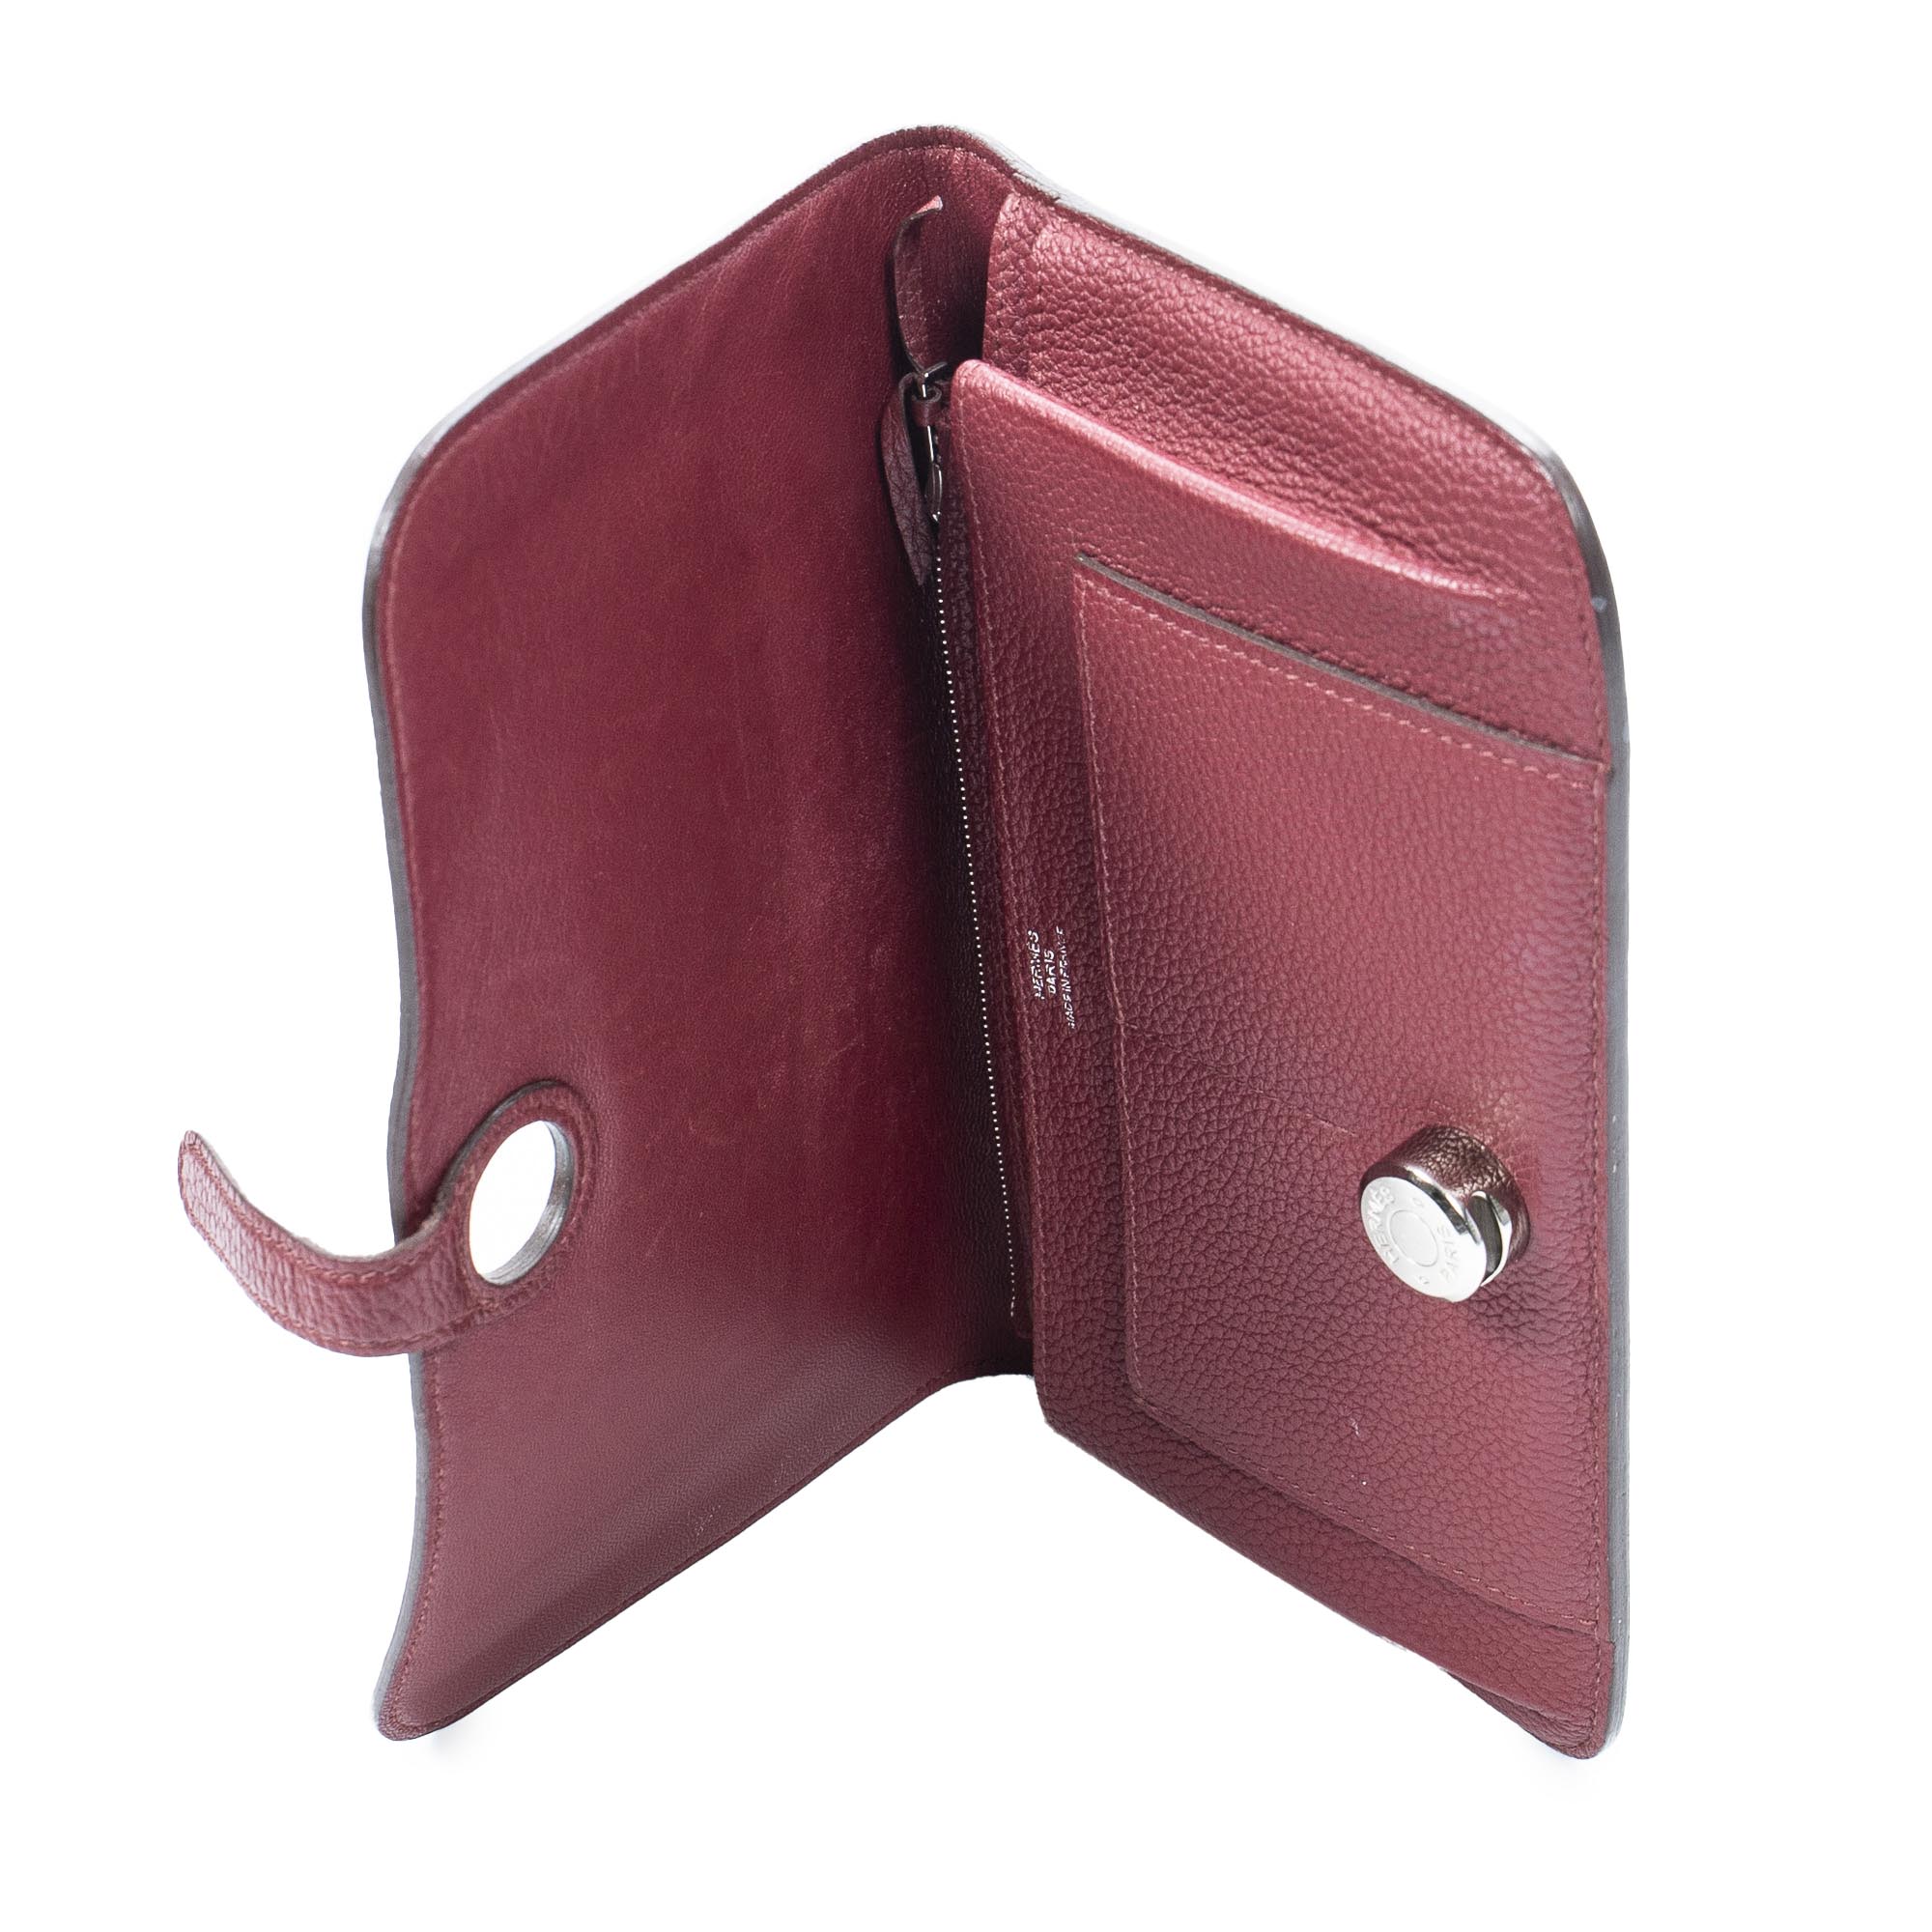 Shop HERMES Dogon Dogon duo wallet (H065732CK8F, H065732CK2Z, H065732CK0G,  H065732CK28, H043070CK10, H065732CKS4, H065732CK8W, H043070CK89,  H043070CK53, H043070CK0L) by LudivineBuyers